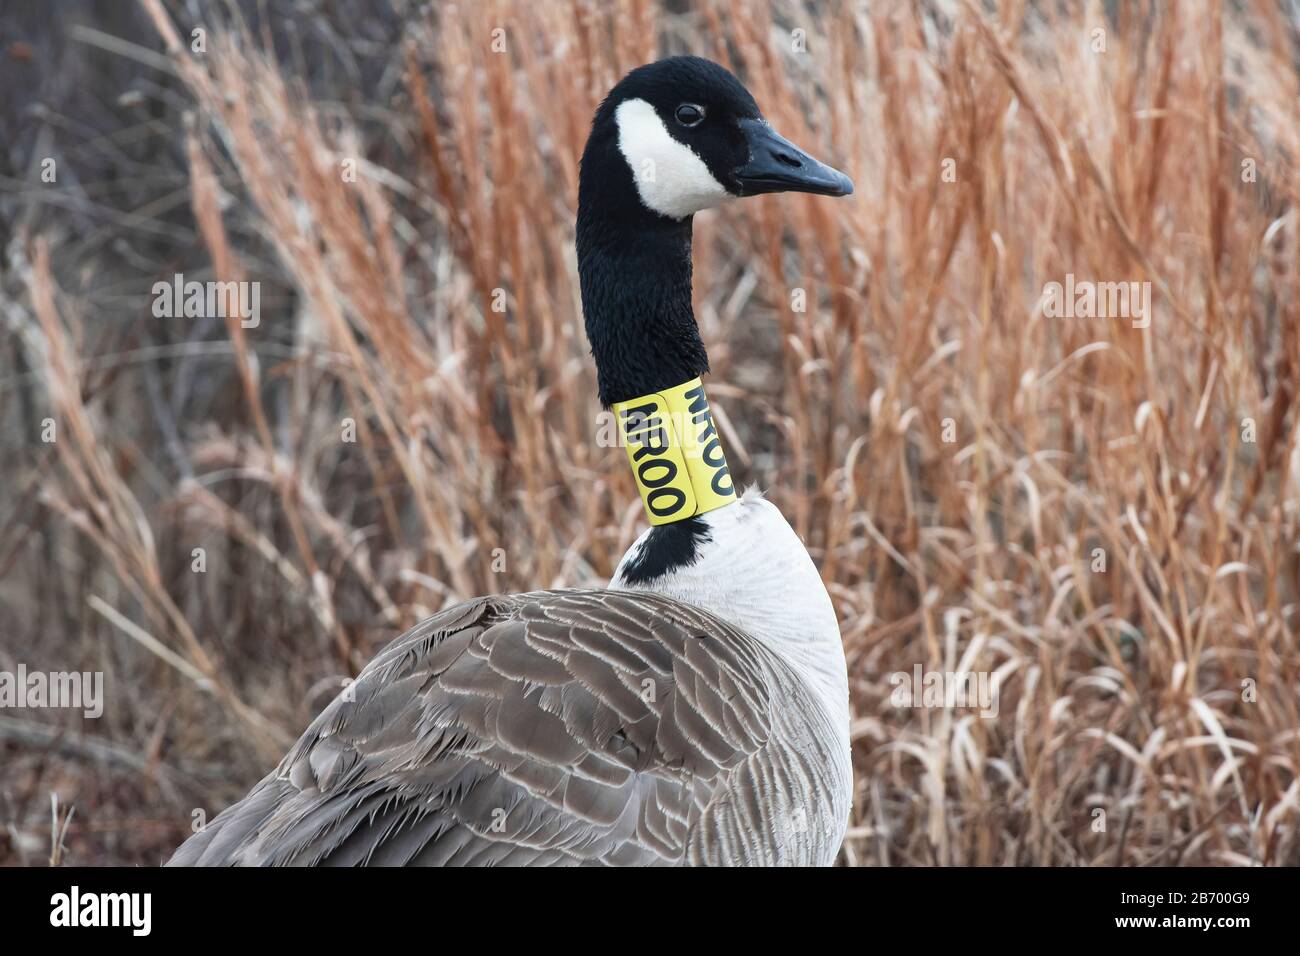 Canada goose with yellow neck band Stock Photo - Alamy